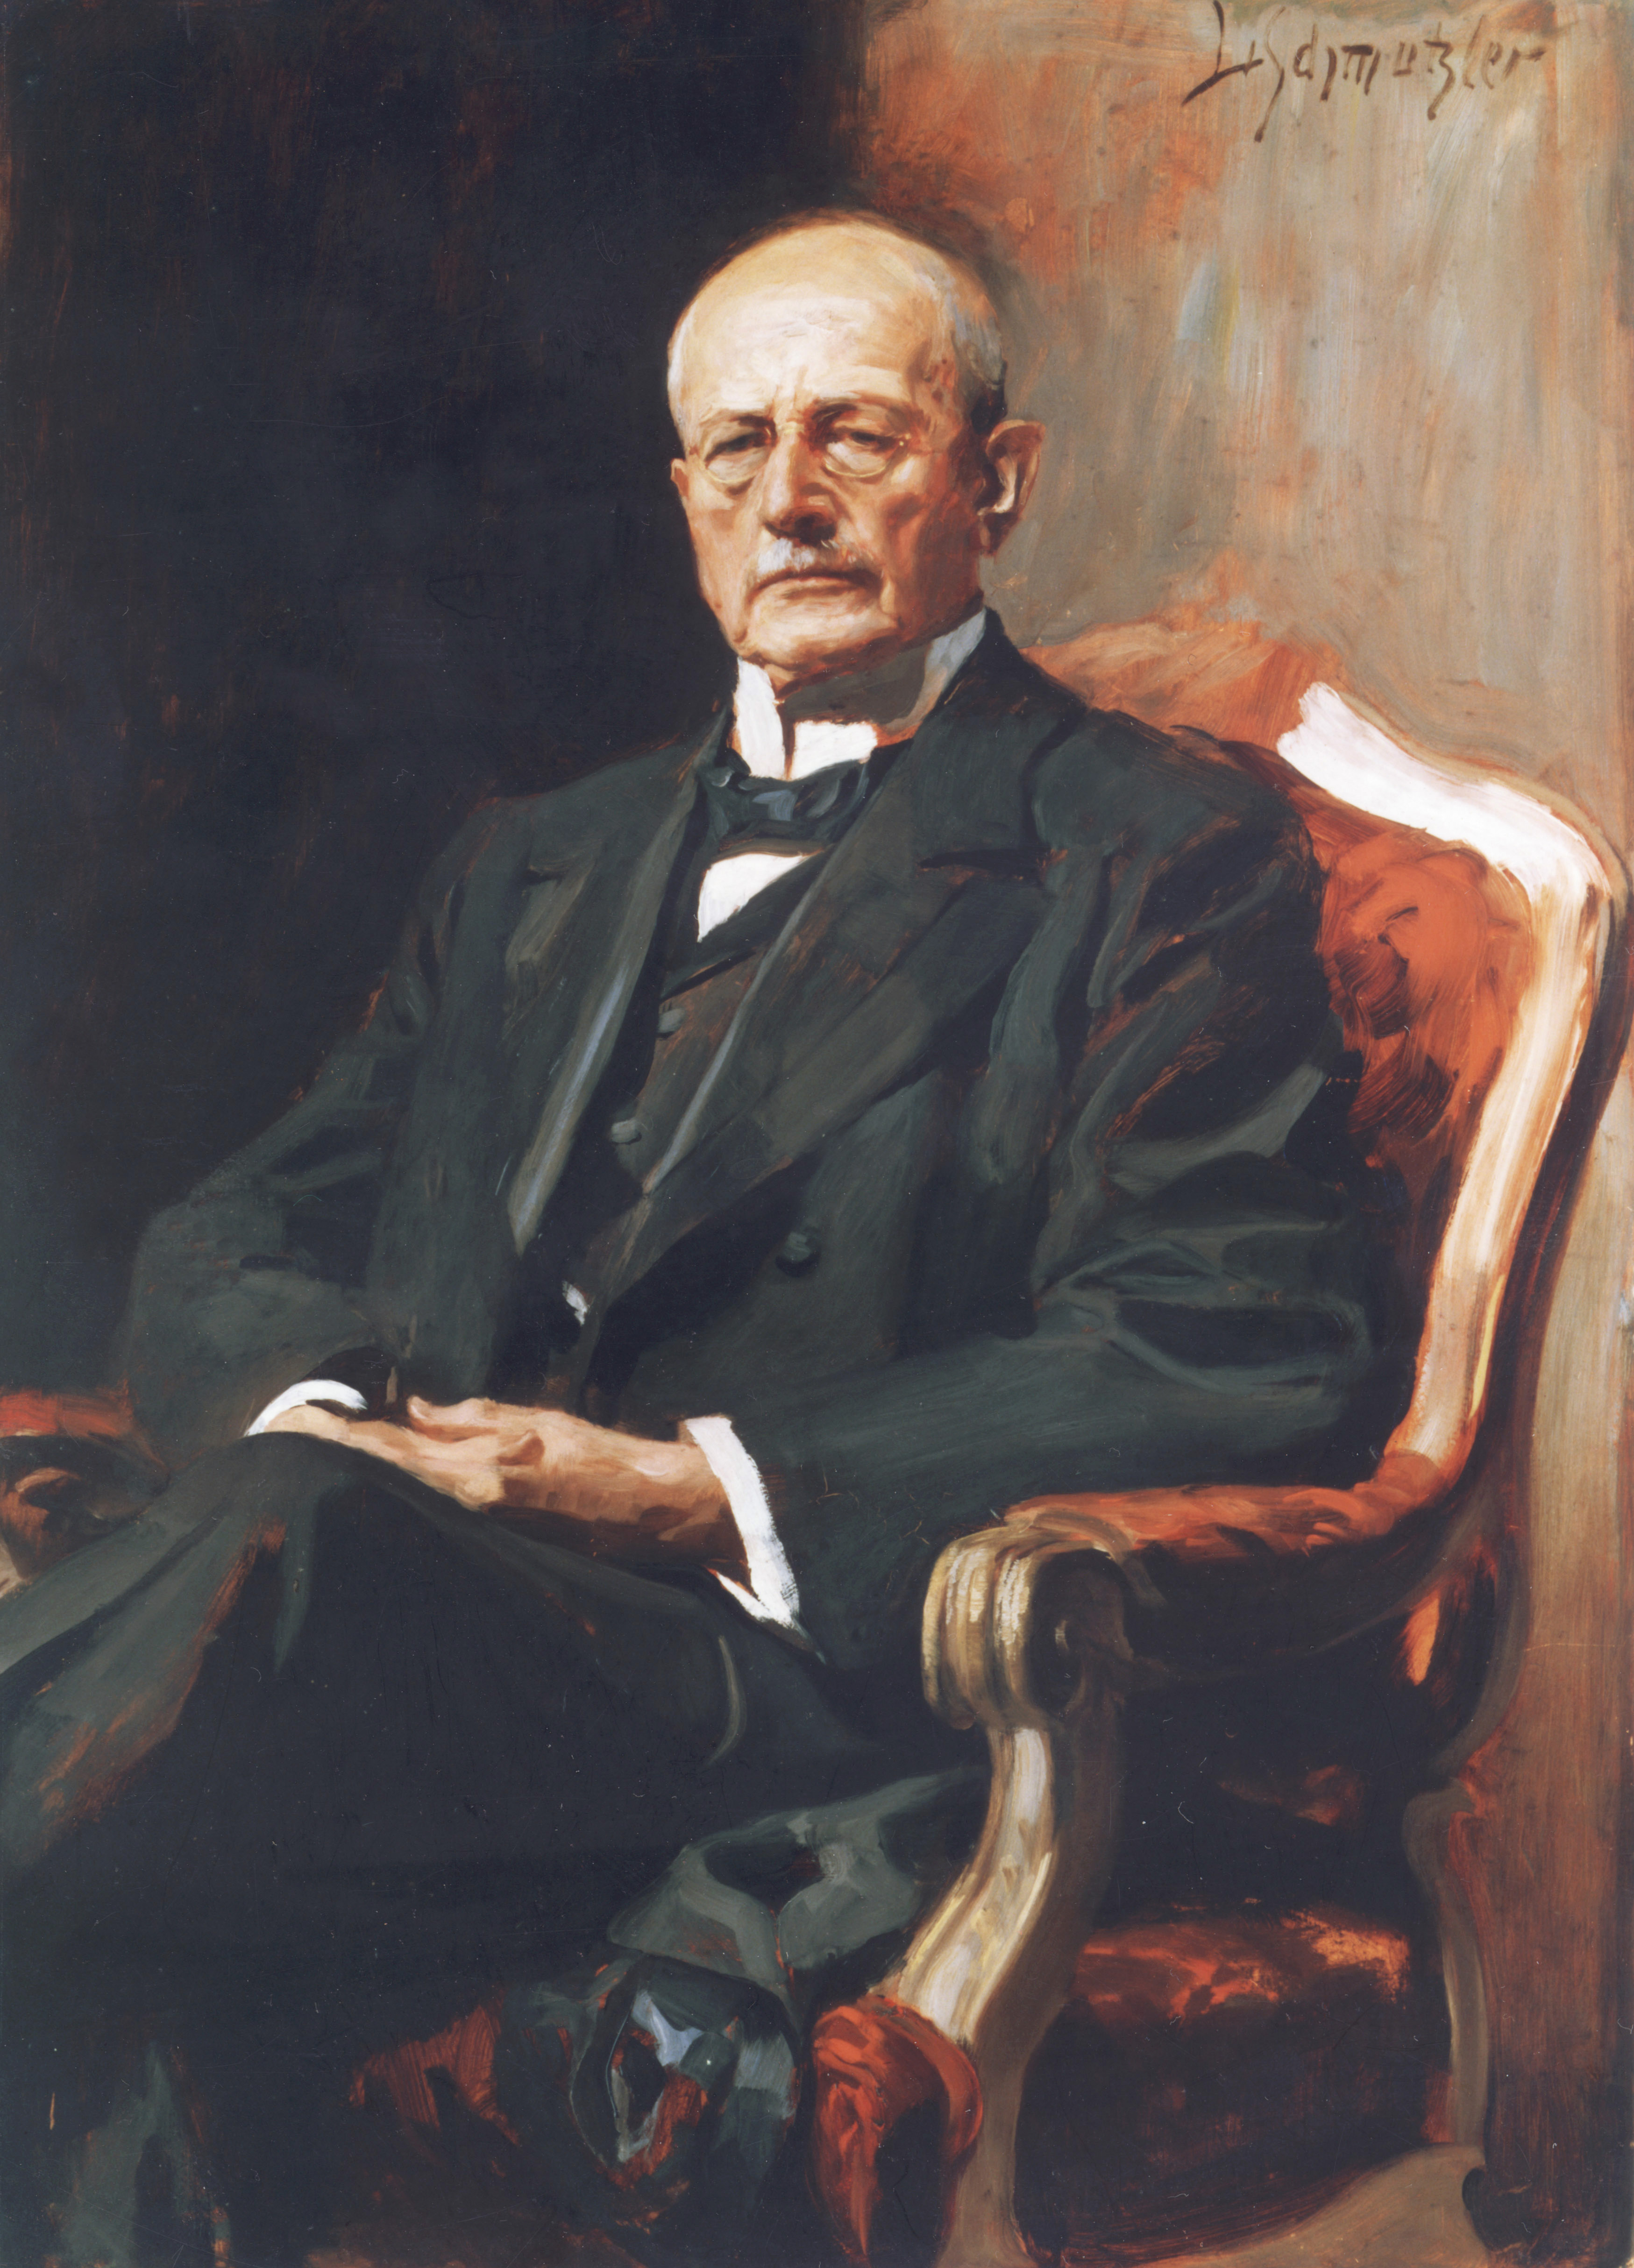 co-founder of Munich Re and Chair of the Board of Management from 1880 to 1921.